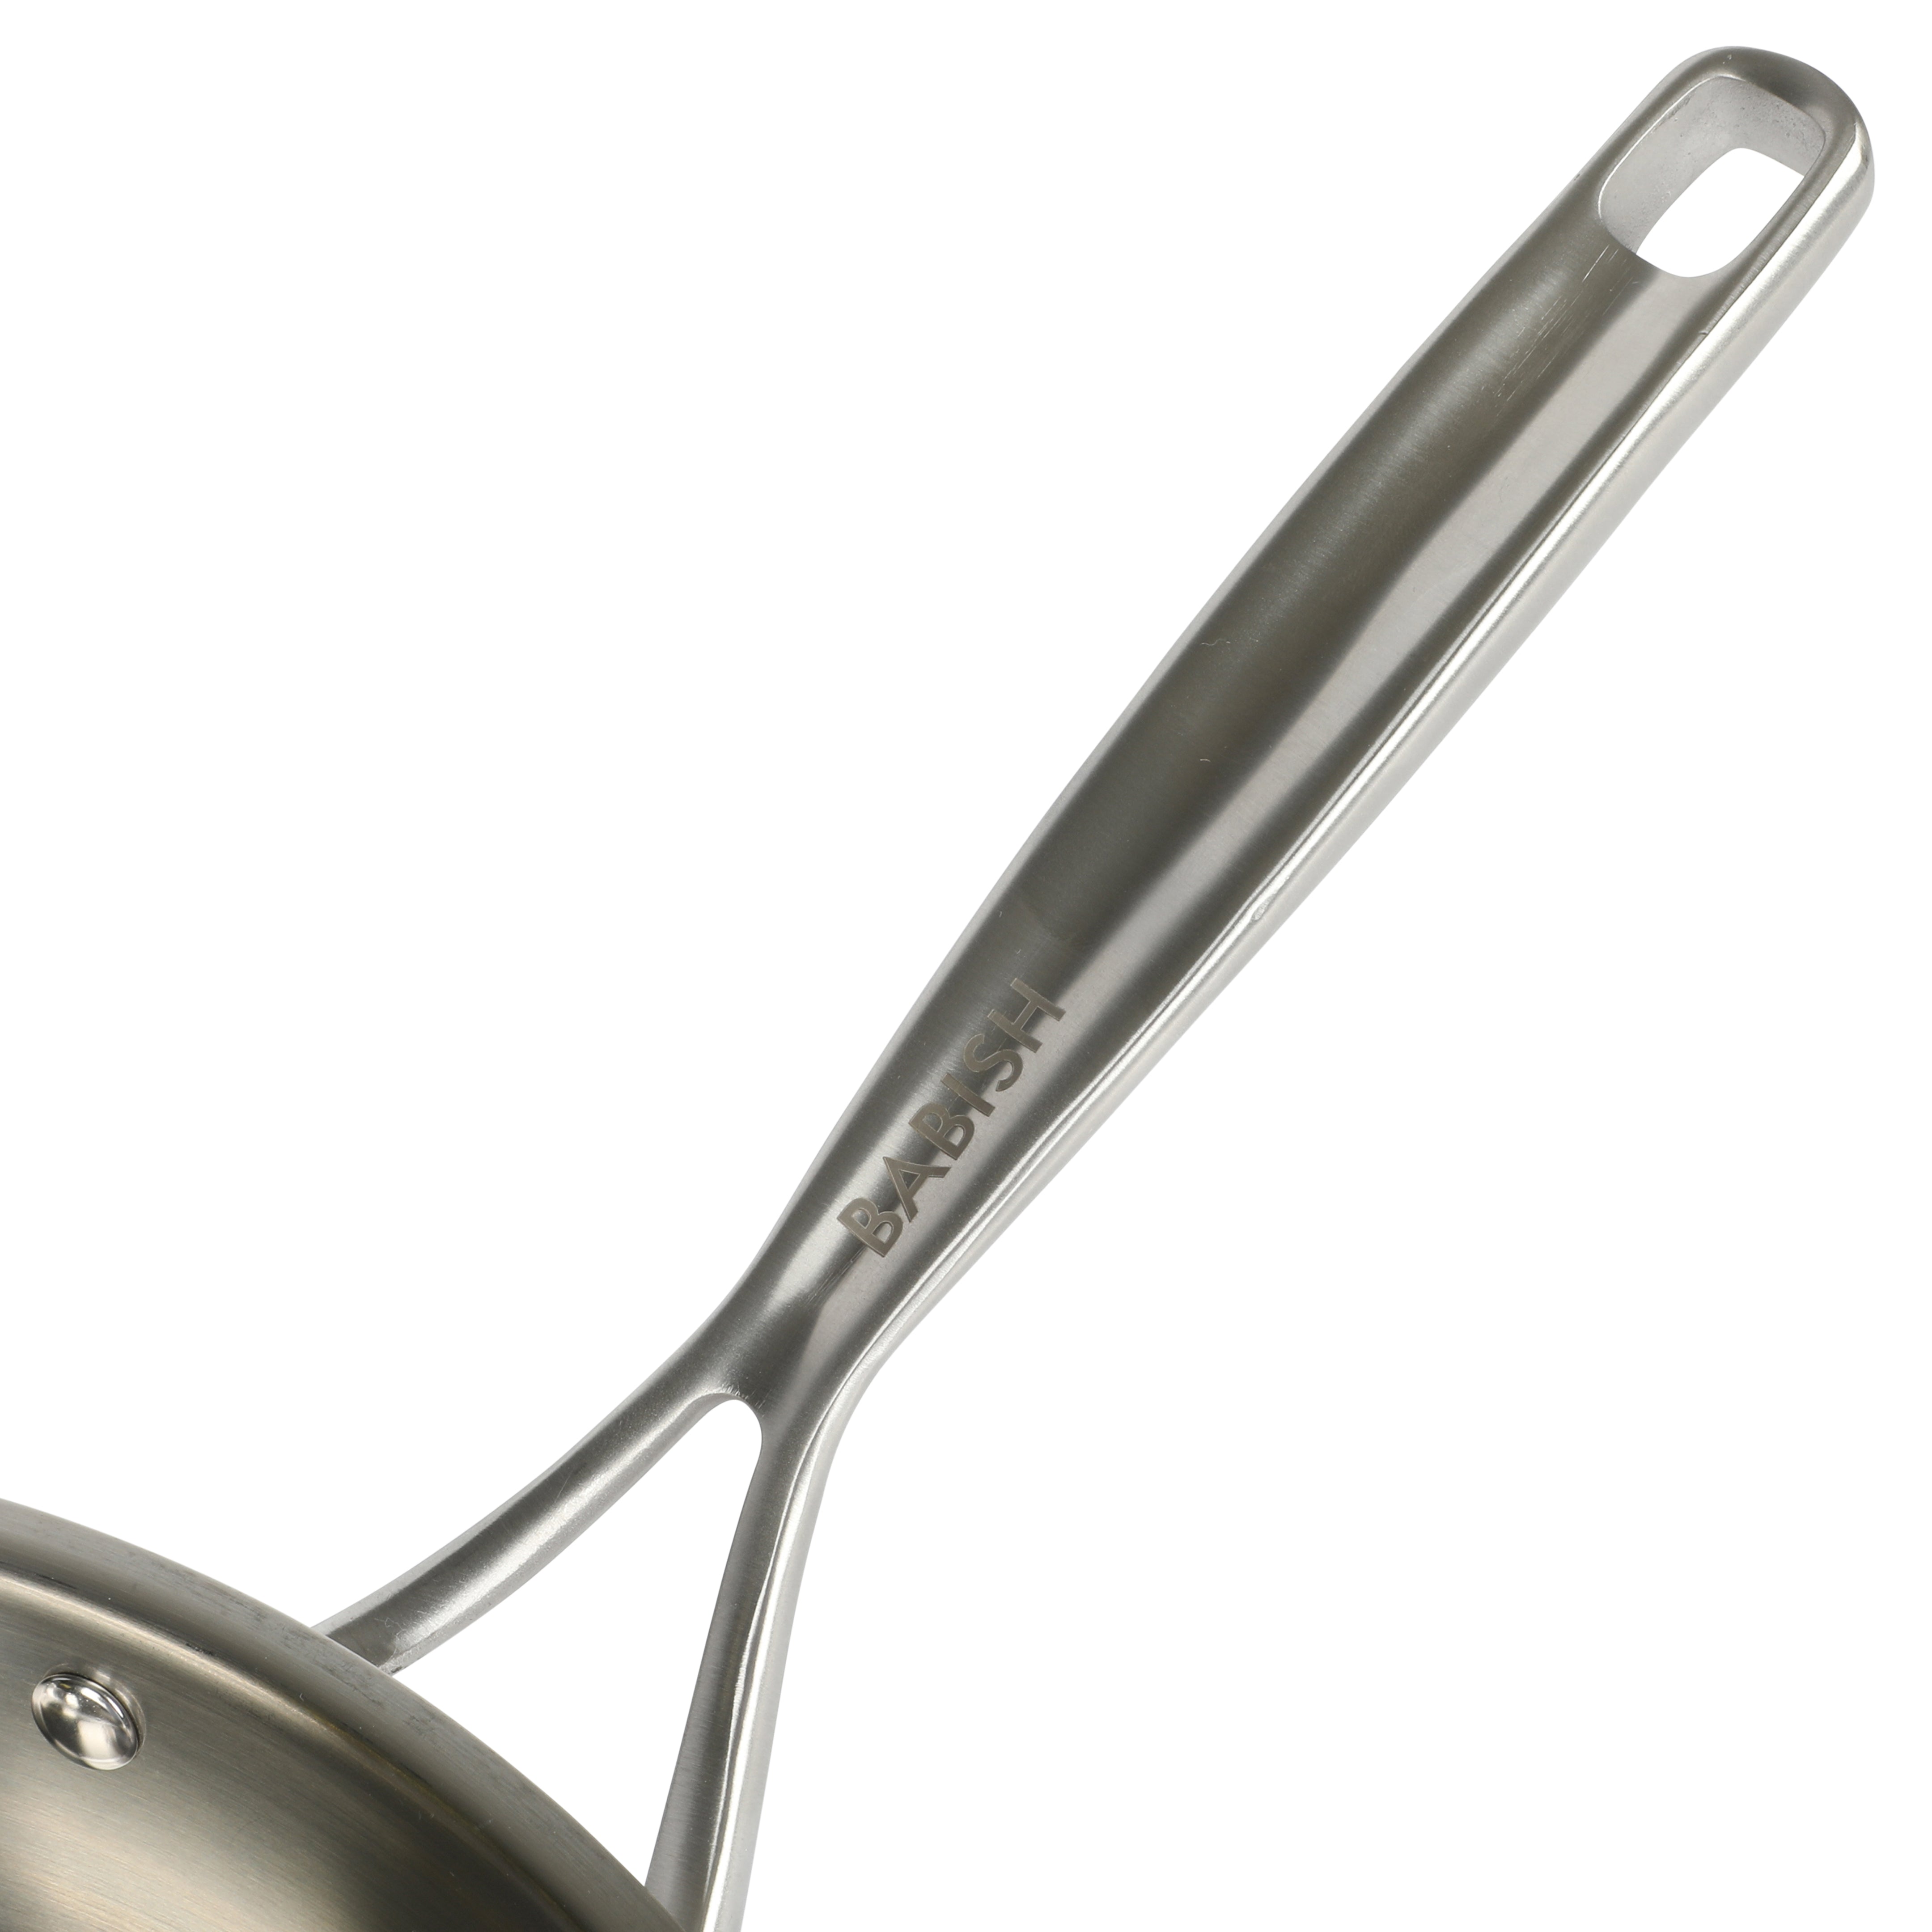 Babish 10-Inch Triply Stainless Steel Professional Grade Fry Pan